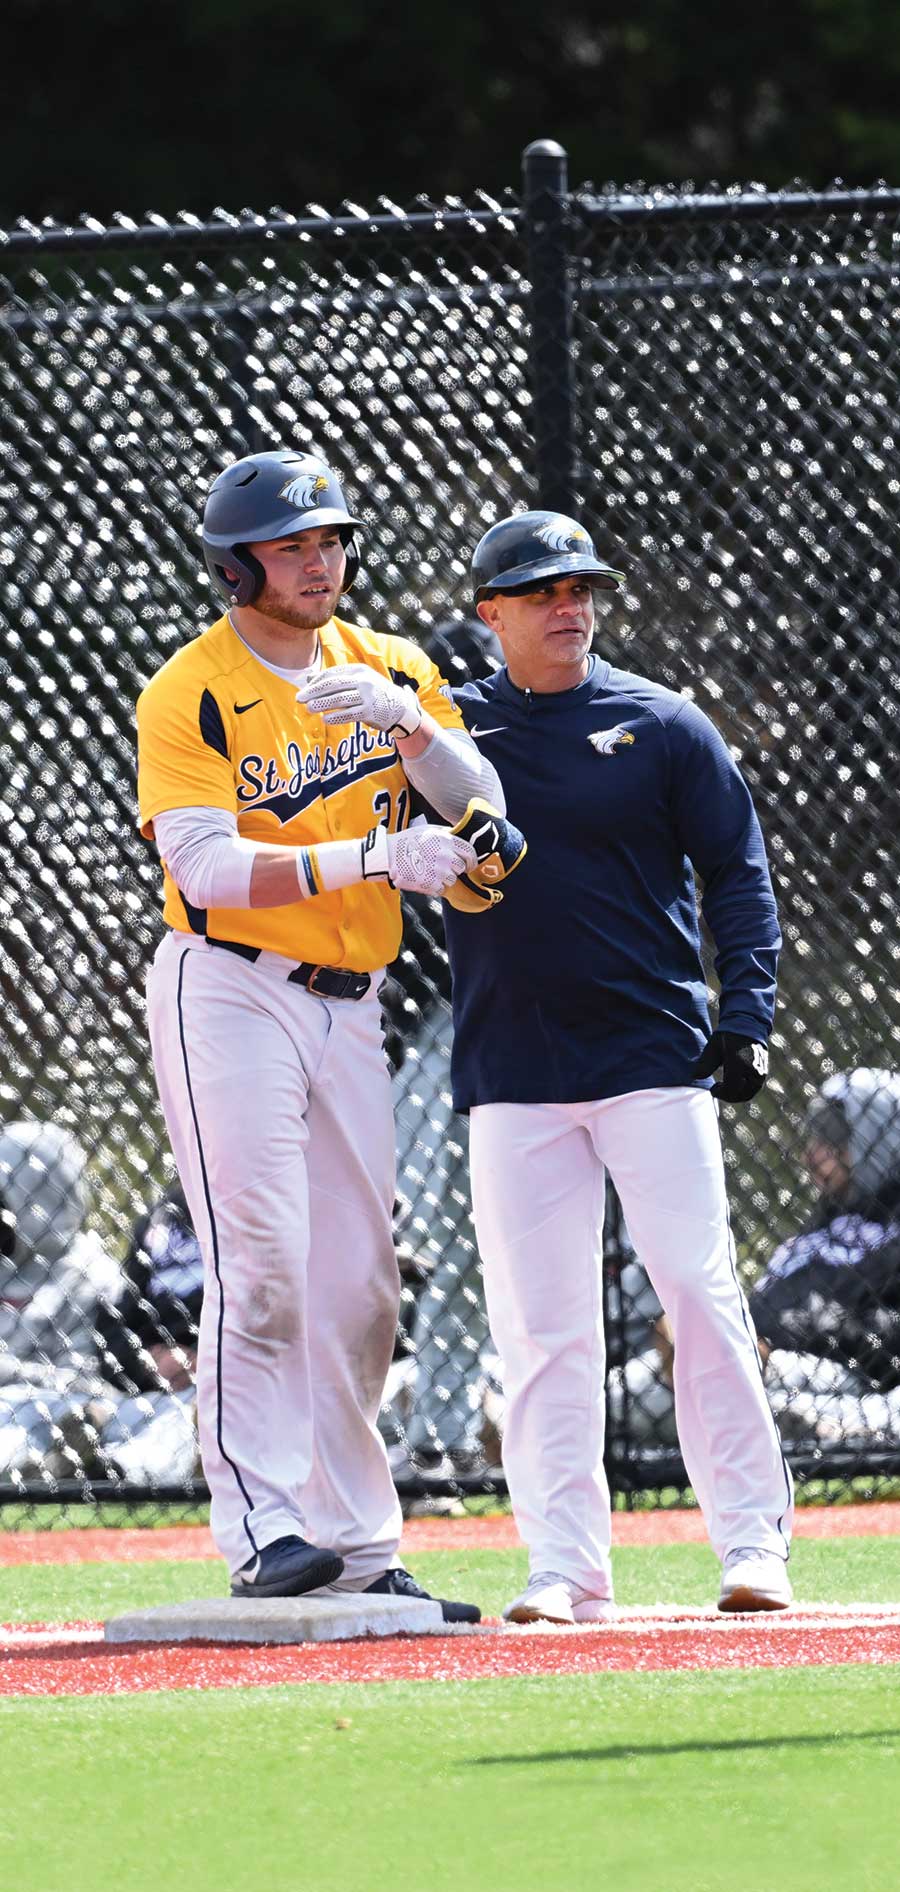 A portrait photograph of St. Joseph's Long Island Golden Eagles assistant baseball coach Andrew "Asch" Aschettino (pictured on the right) next to a Golden Eagles baseball player in their respective uniforms (navy blue and yellow) on first base as they glance over at the home plate area of the baseball field